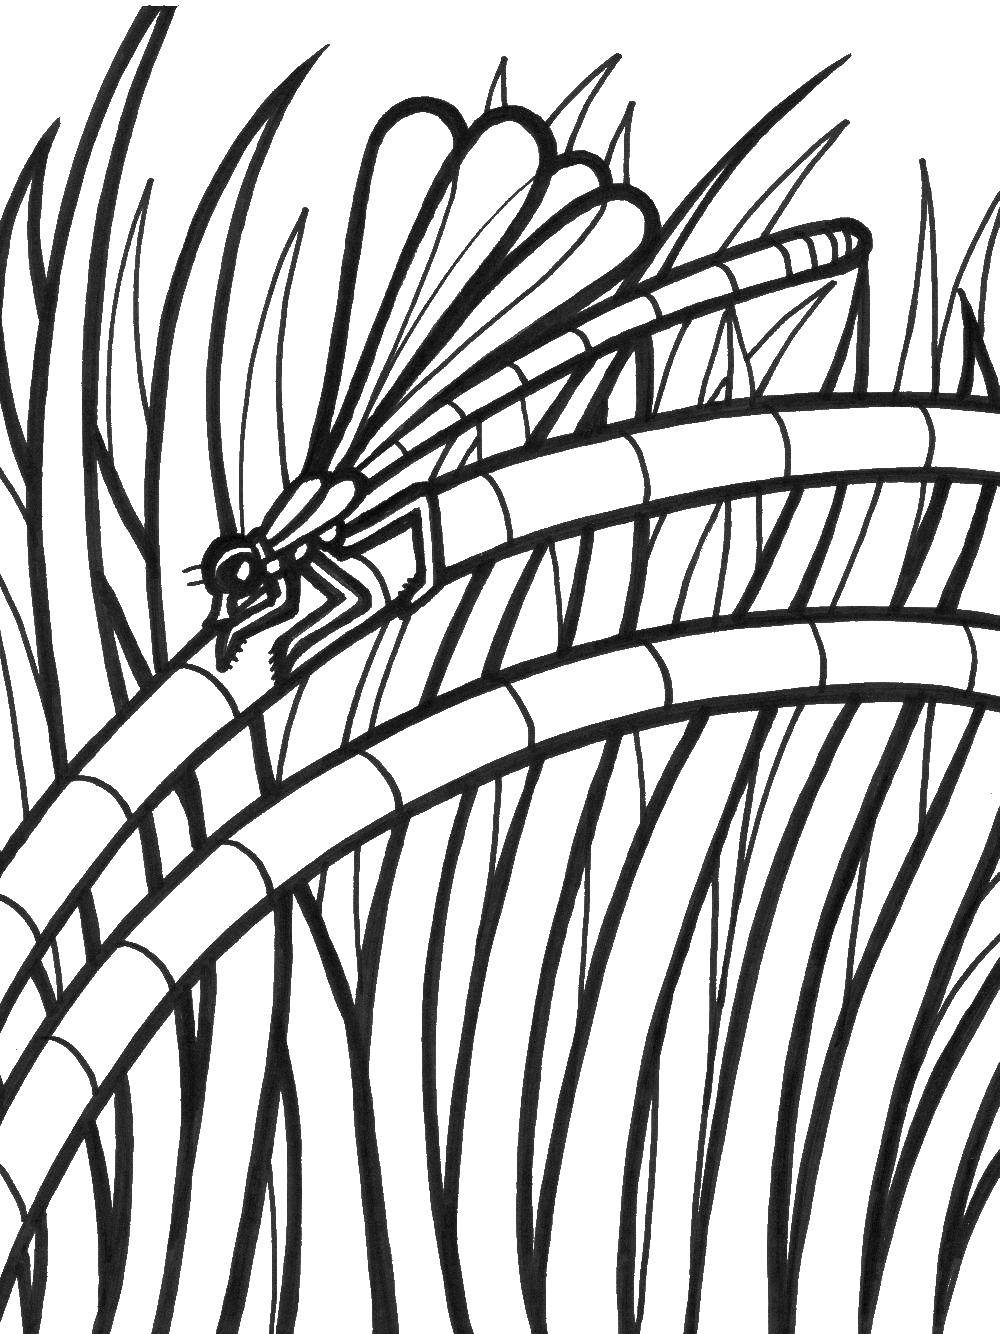 Coloring Dragonfly. Category Insects. Tags:  insects, dragonfly.